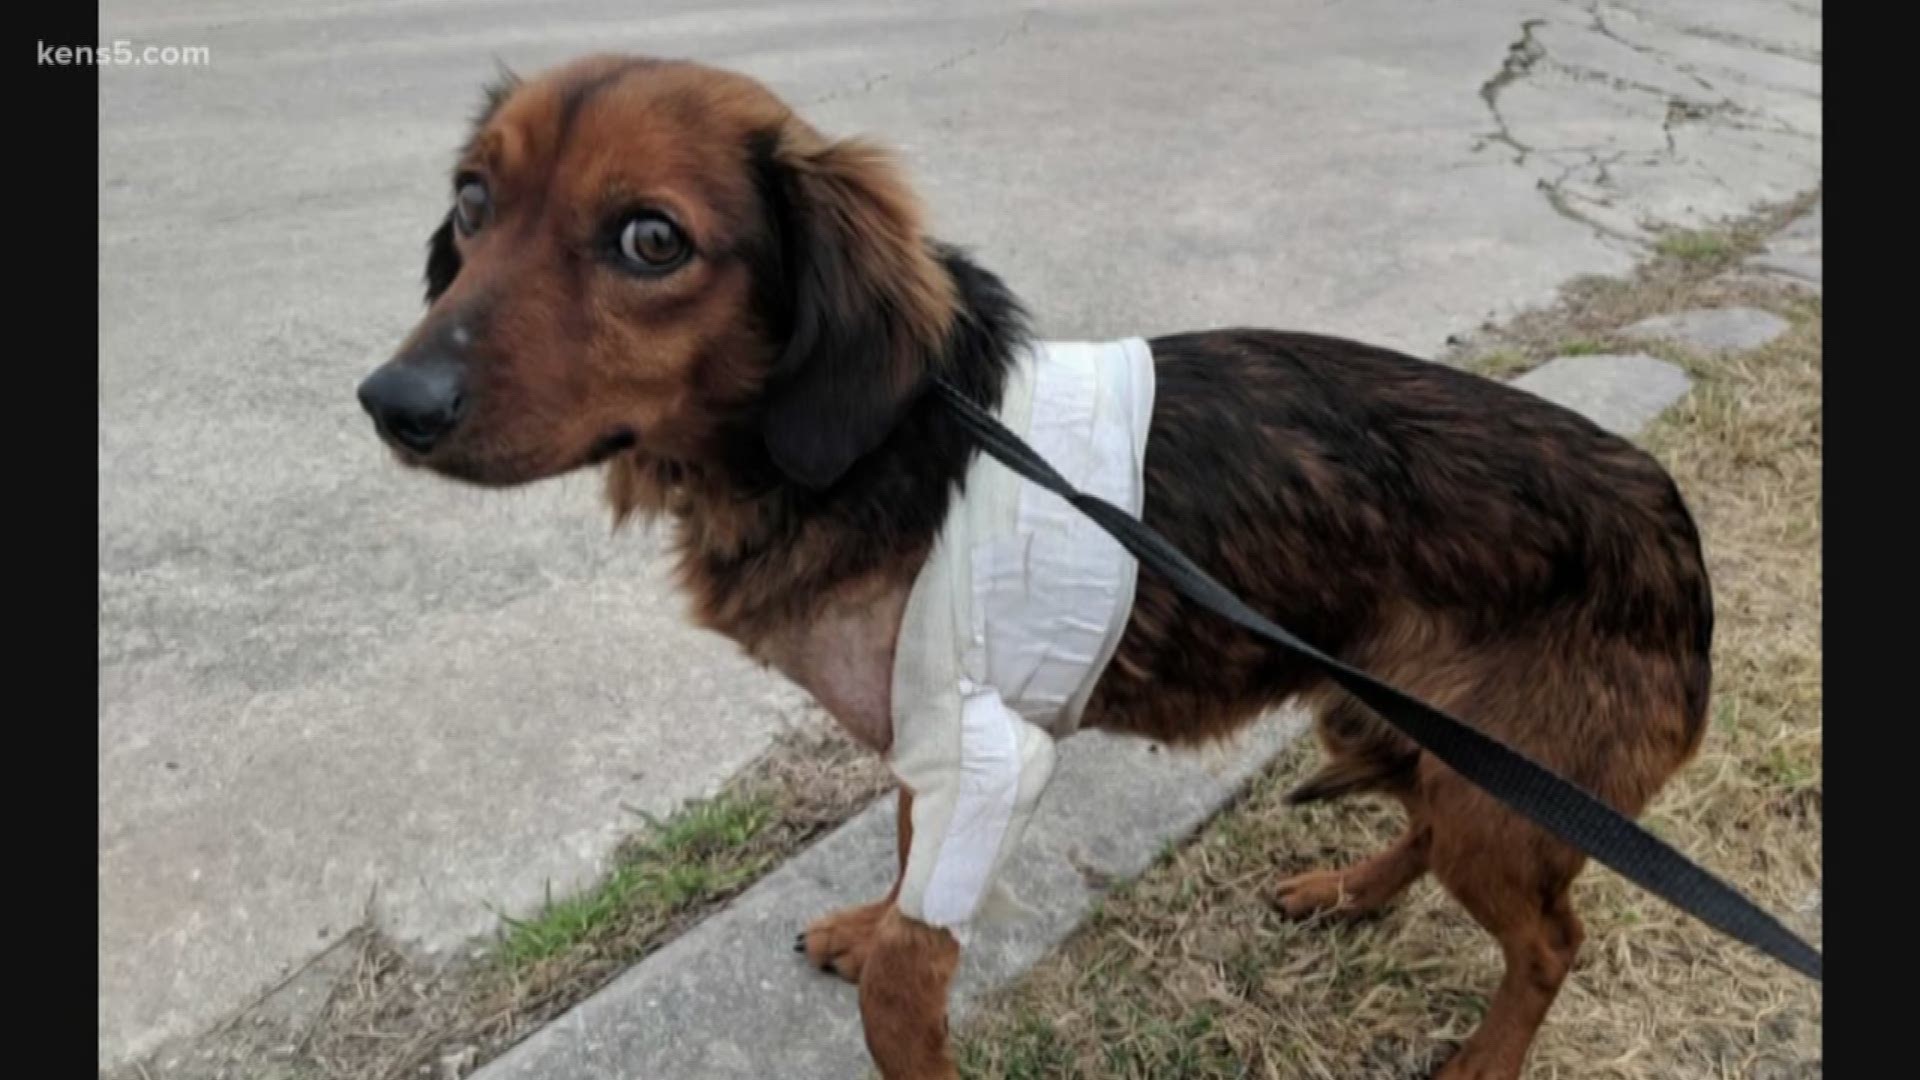 San Antonio Pets Alive rescued the puppy after they believe he was hit by a car, but he is still on a road to recovery